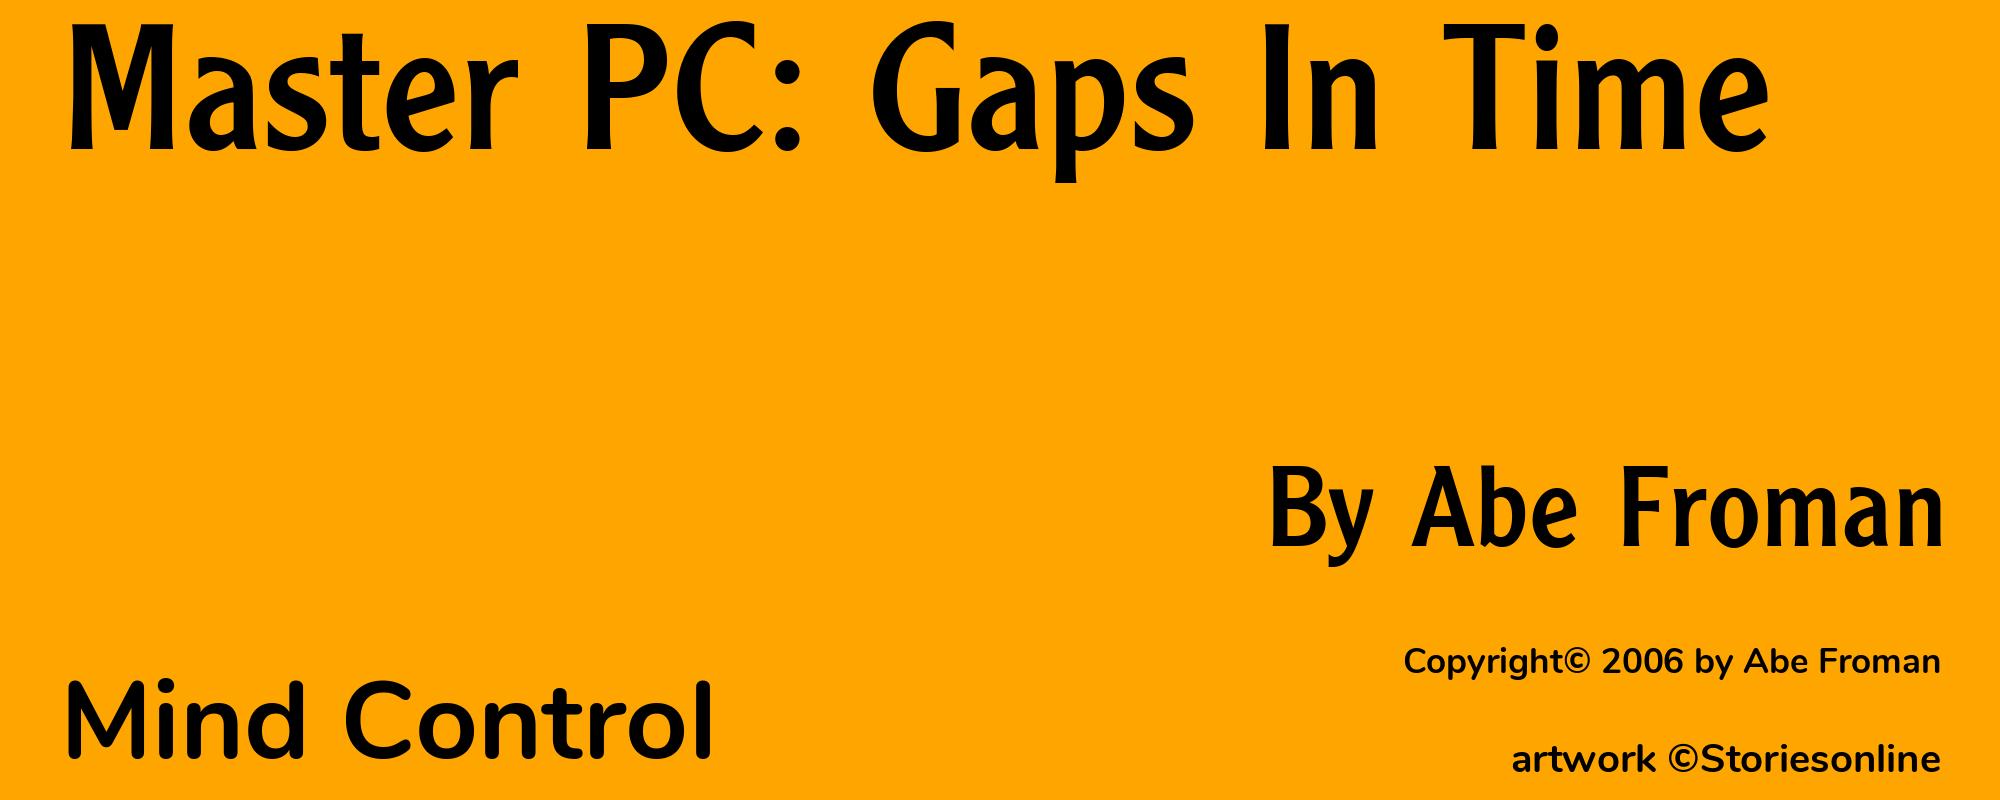 Master PC: Gaps In Time - Cover